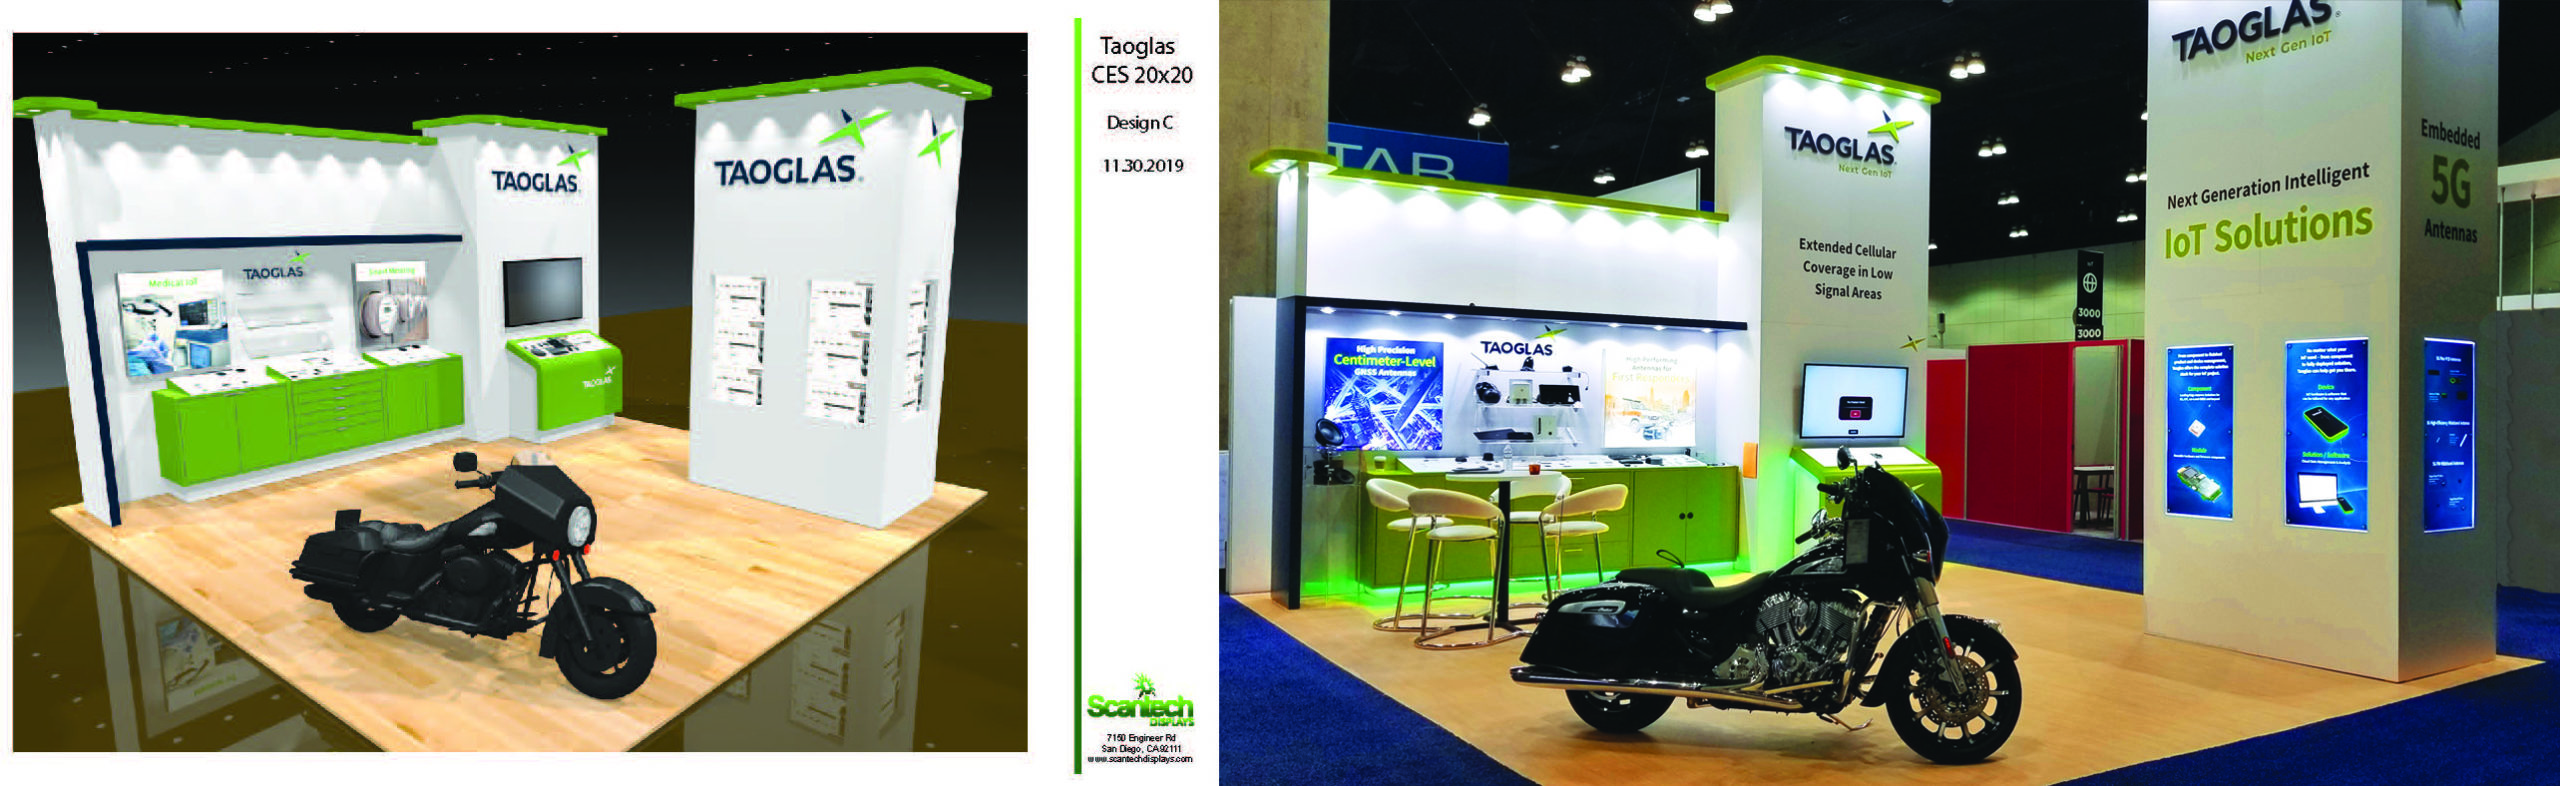 Tradeshow design rendering and resulting build